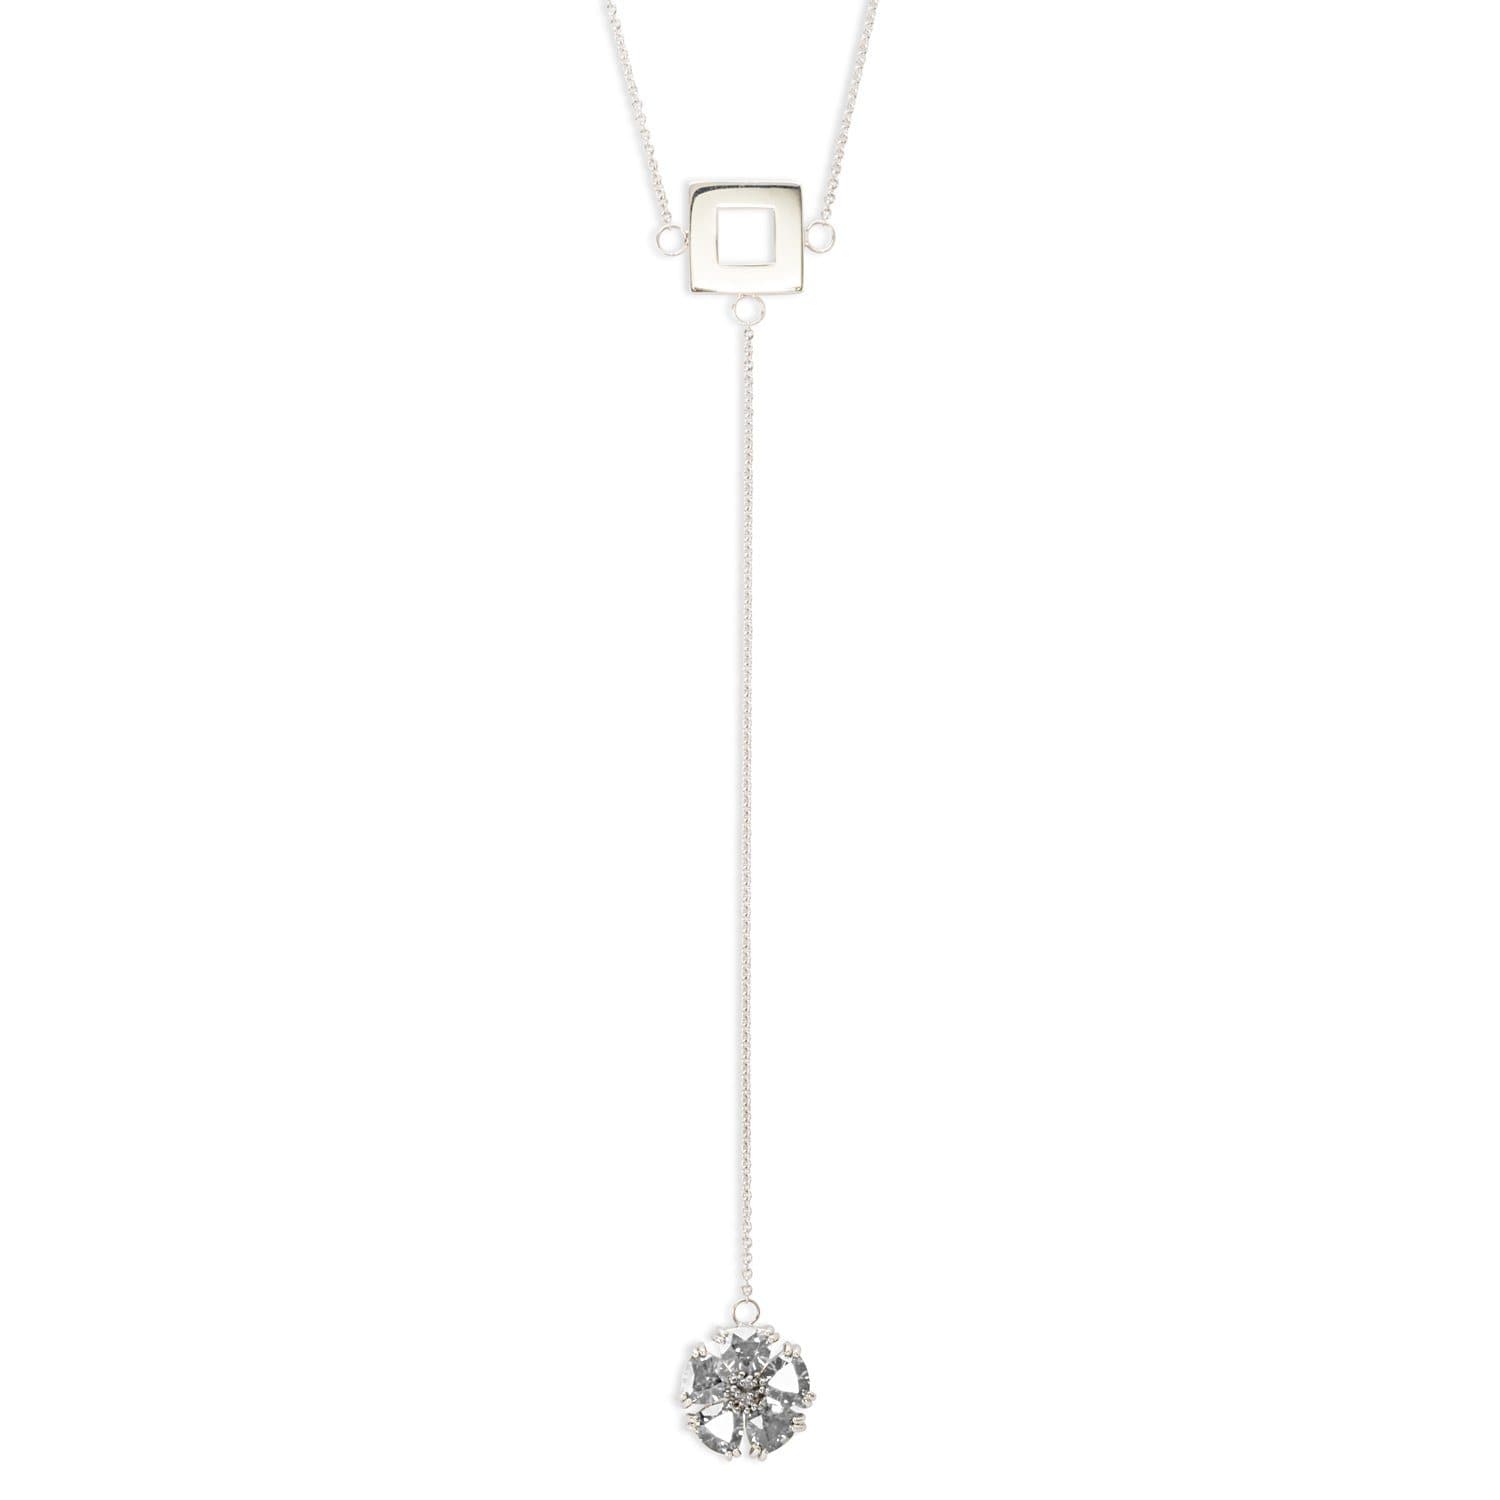 Designer Lariat Necklace with Blossom Stones, Square White Topaz / Additional Sizes Available Upon Request / Silver